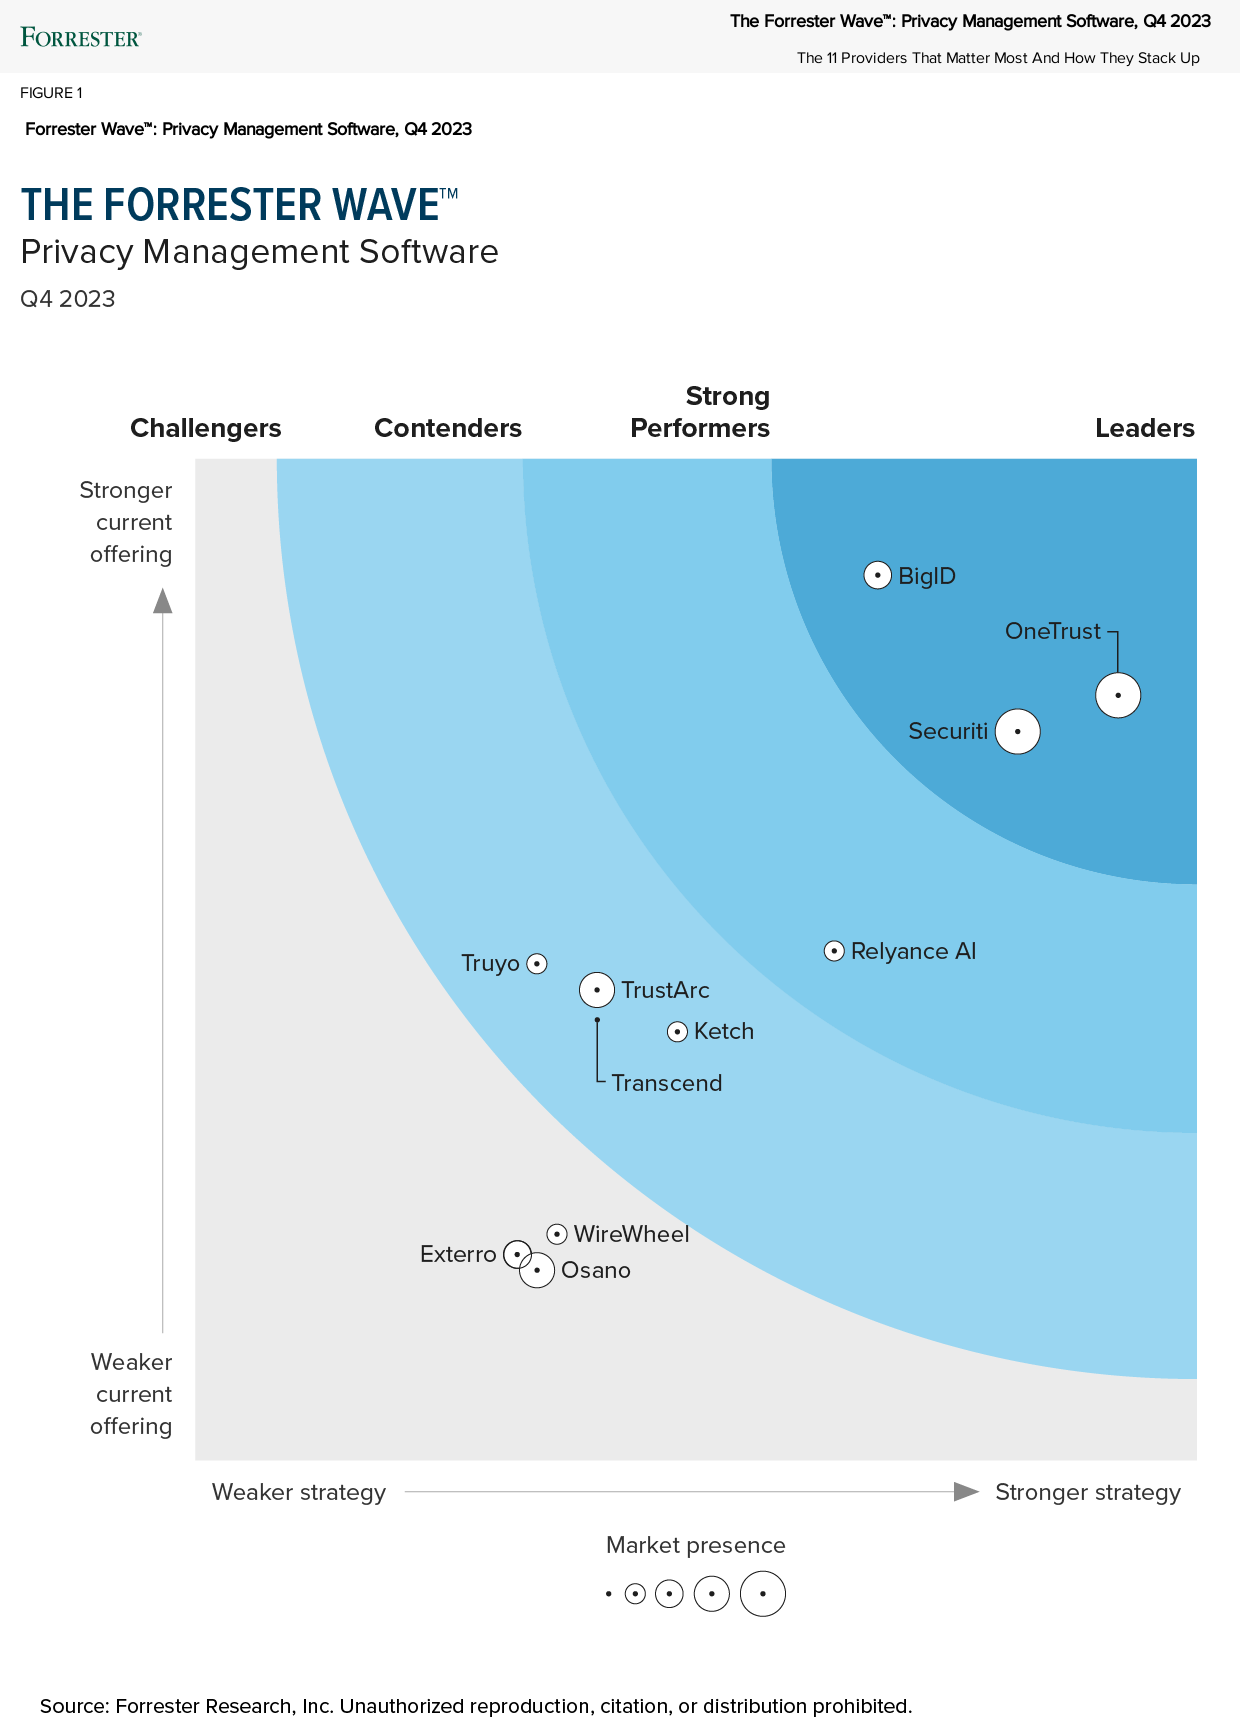 Graphic showing OneTrust's position as a leader on The Forrester Wave™ Privacy Management Software Q4 2023 report.